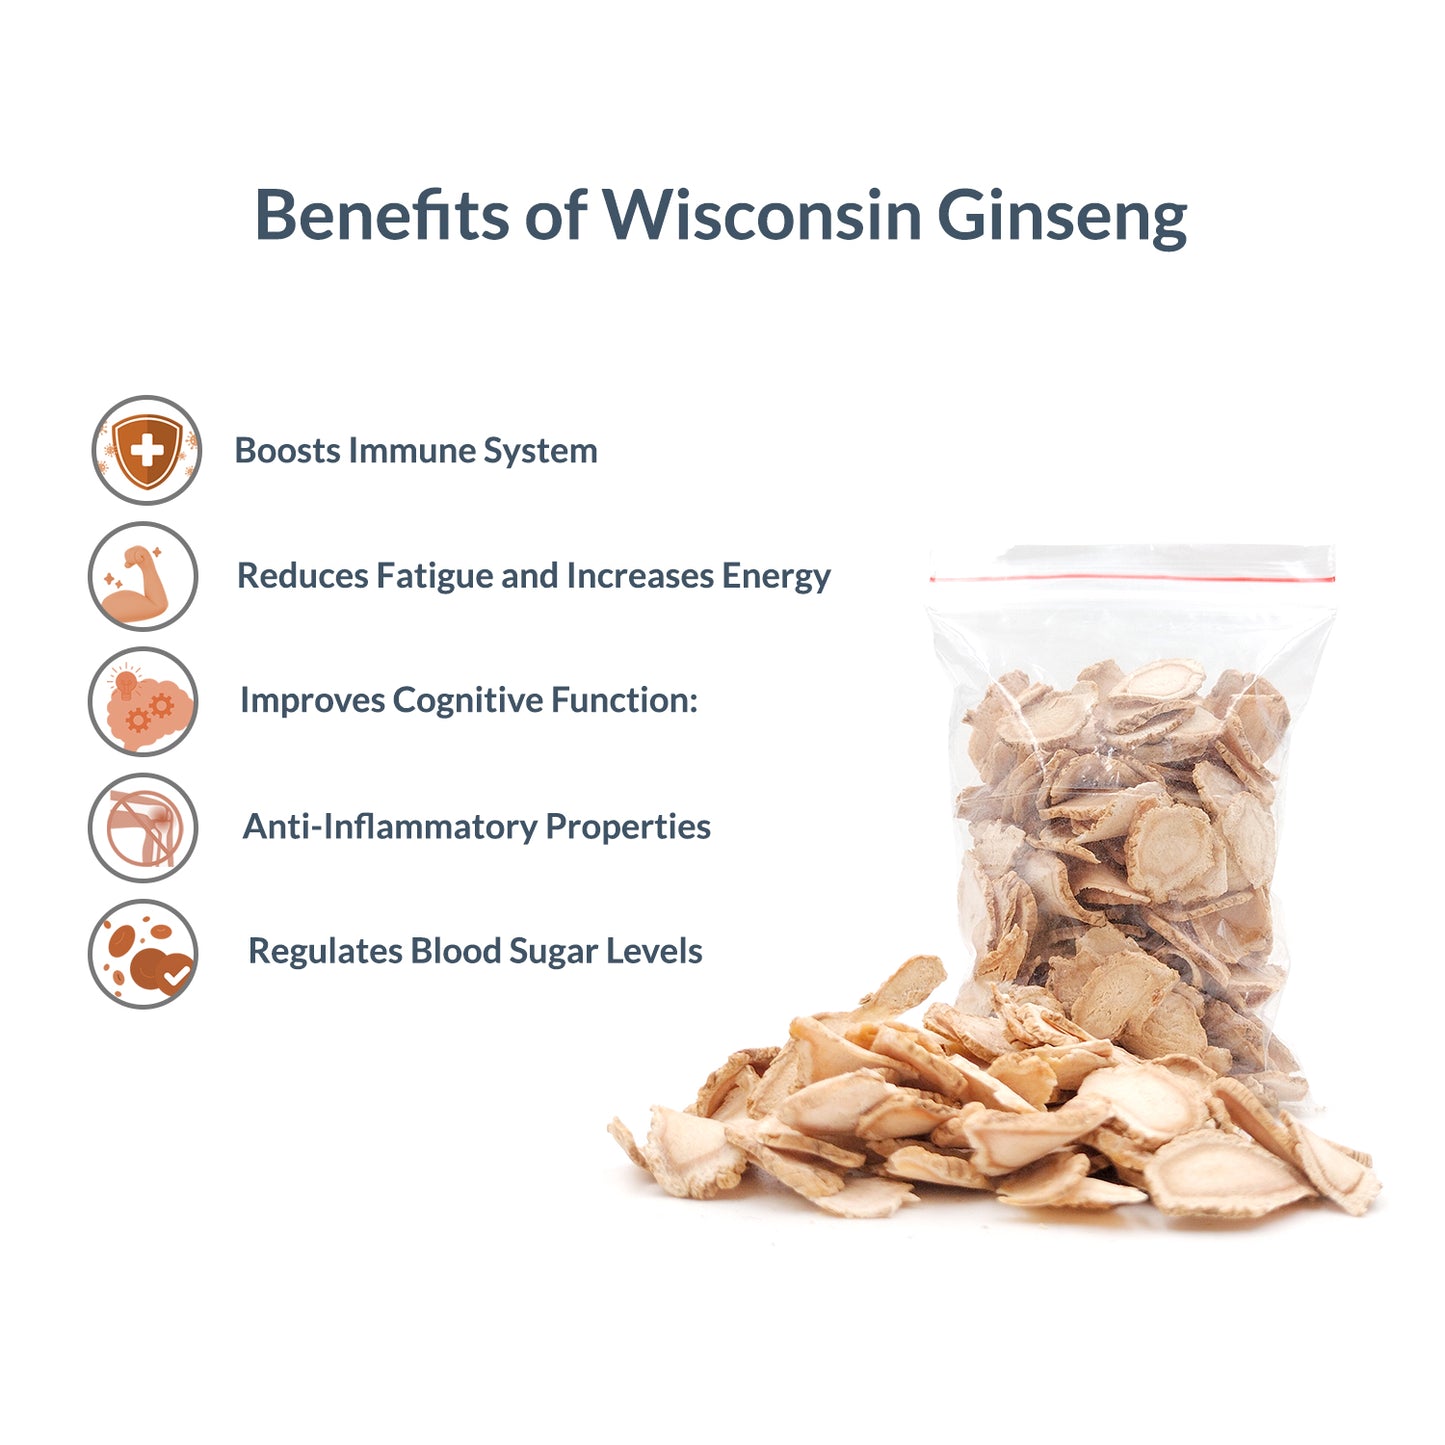 iCare® Ginseng 30g pack and 50g pack (Wisconsin Ginseng)